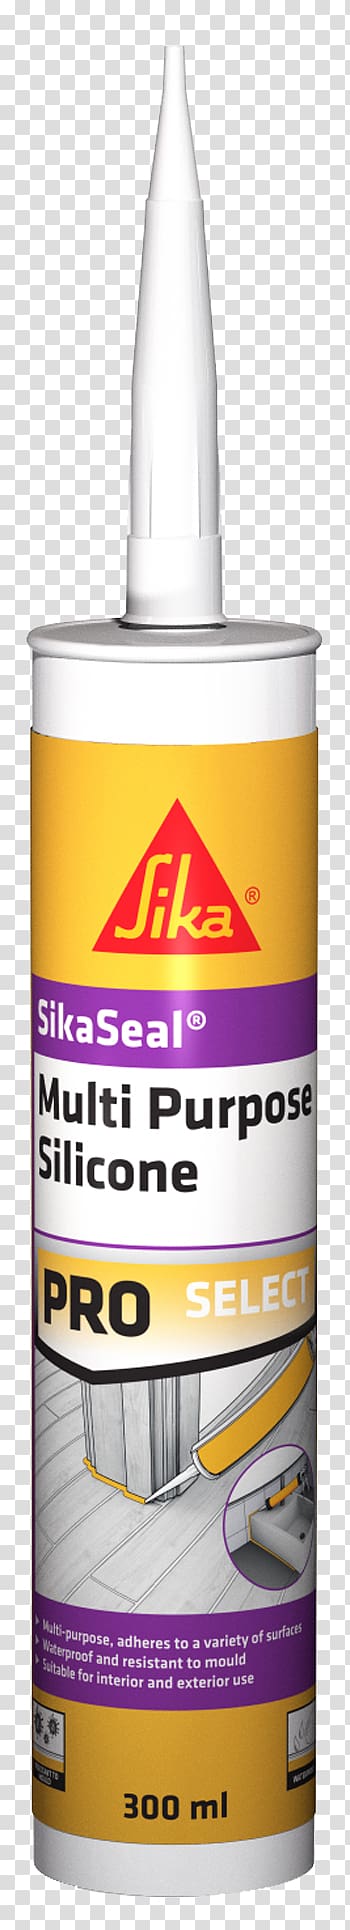 Caulking Sealant Sika AG Adhesive Silicone, Multi Purpose transparent background PNG clipart